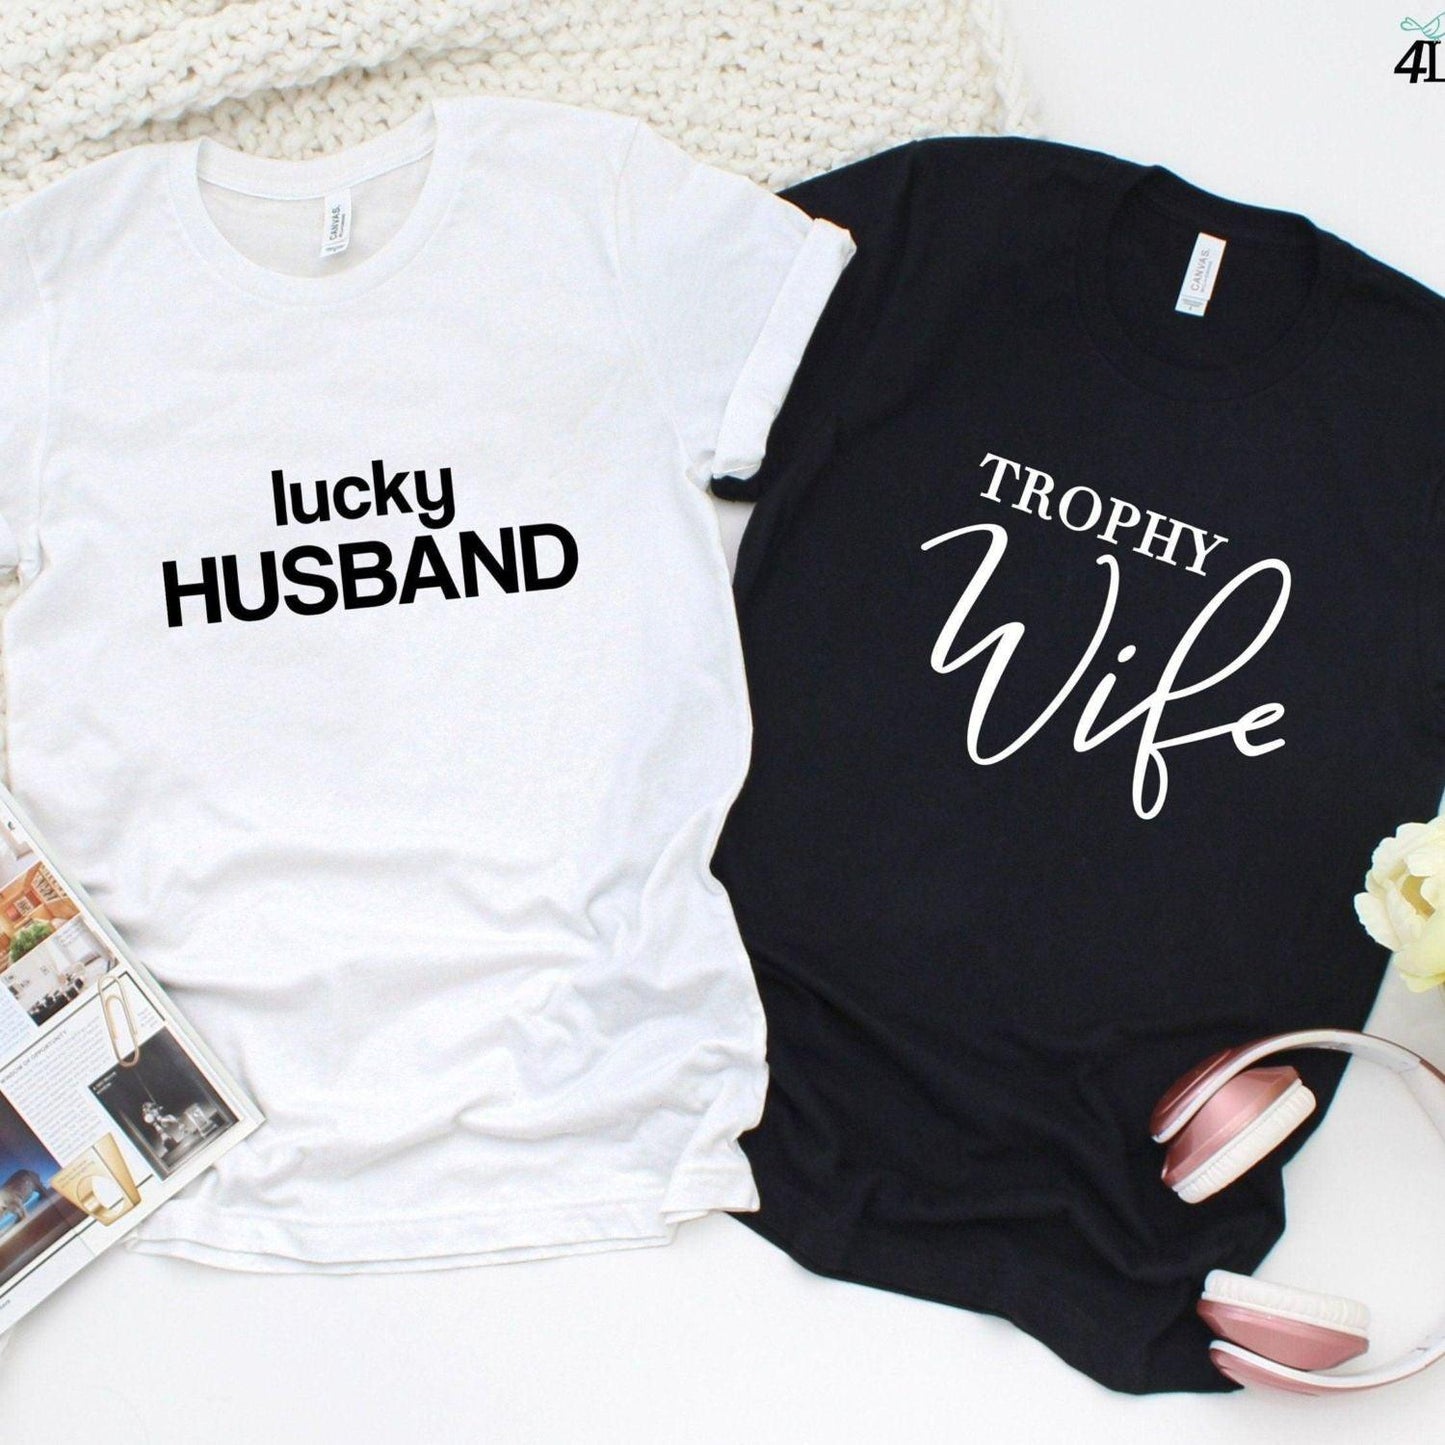 Gift Duo for Couples: Matching Outfits - Lucky Husband & Trophy Wife Outfit Set - 4Lovebirds